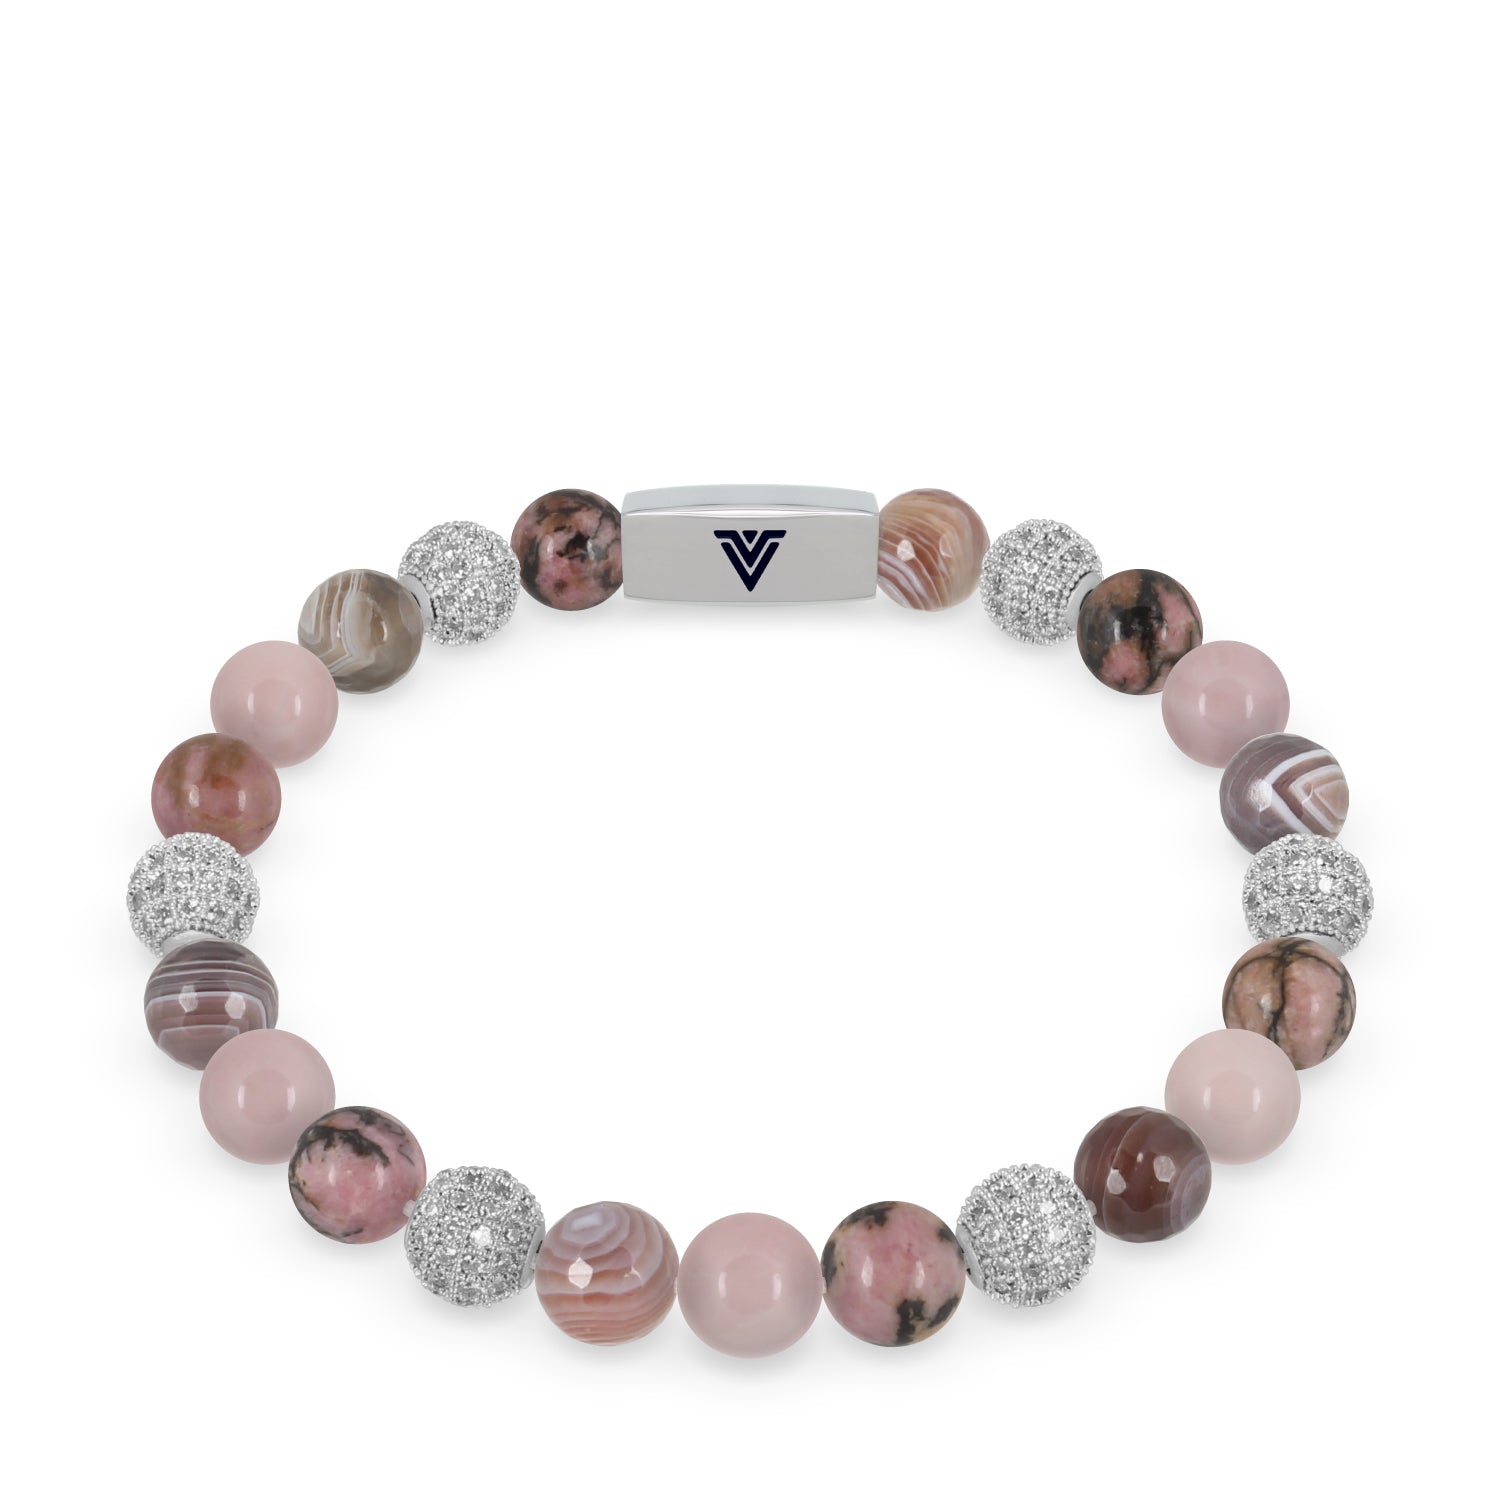 Front view of an 8mm Mauve Sirius beaded stretch bracelet featuring Rhodonite, Silver Pave, Faceted Botswana Agate, & Rose Quartz crystal and silver stainless steel logo bead made by Voltlin